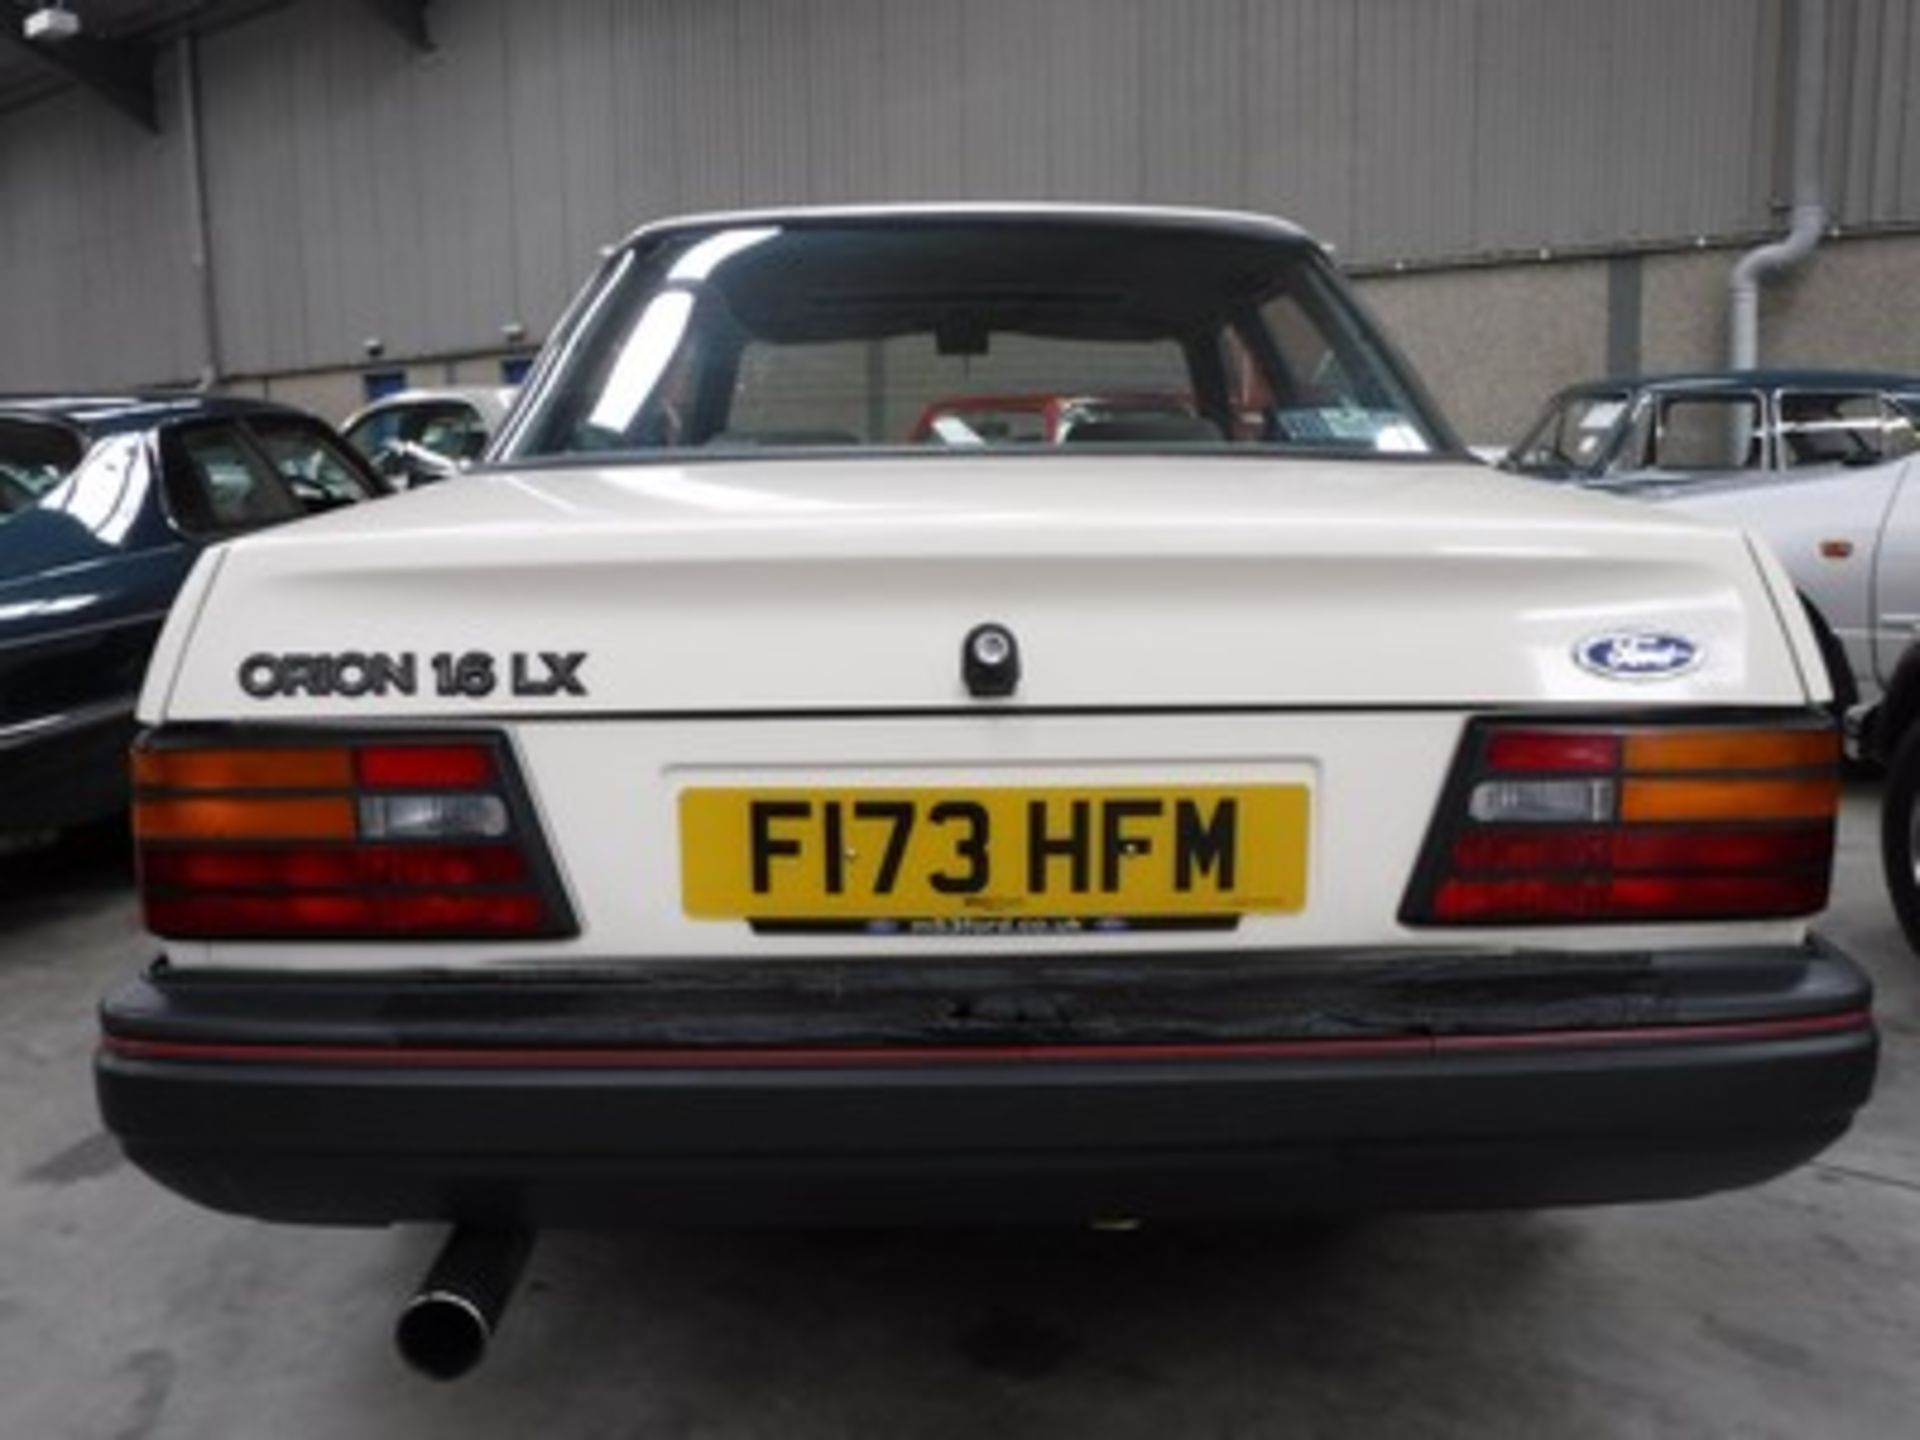 FORD ORION LX - 1596cc - Image 26 of 32